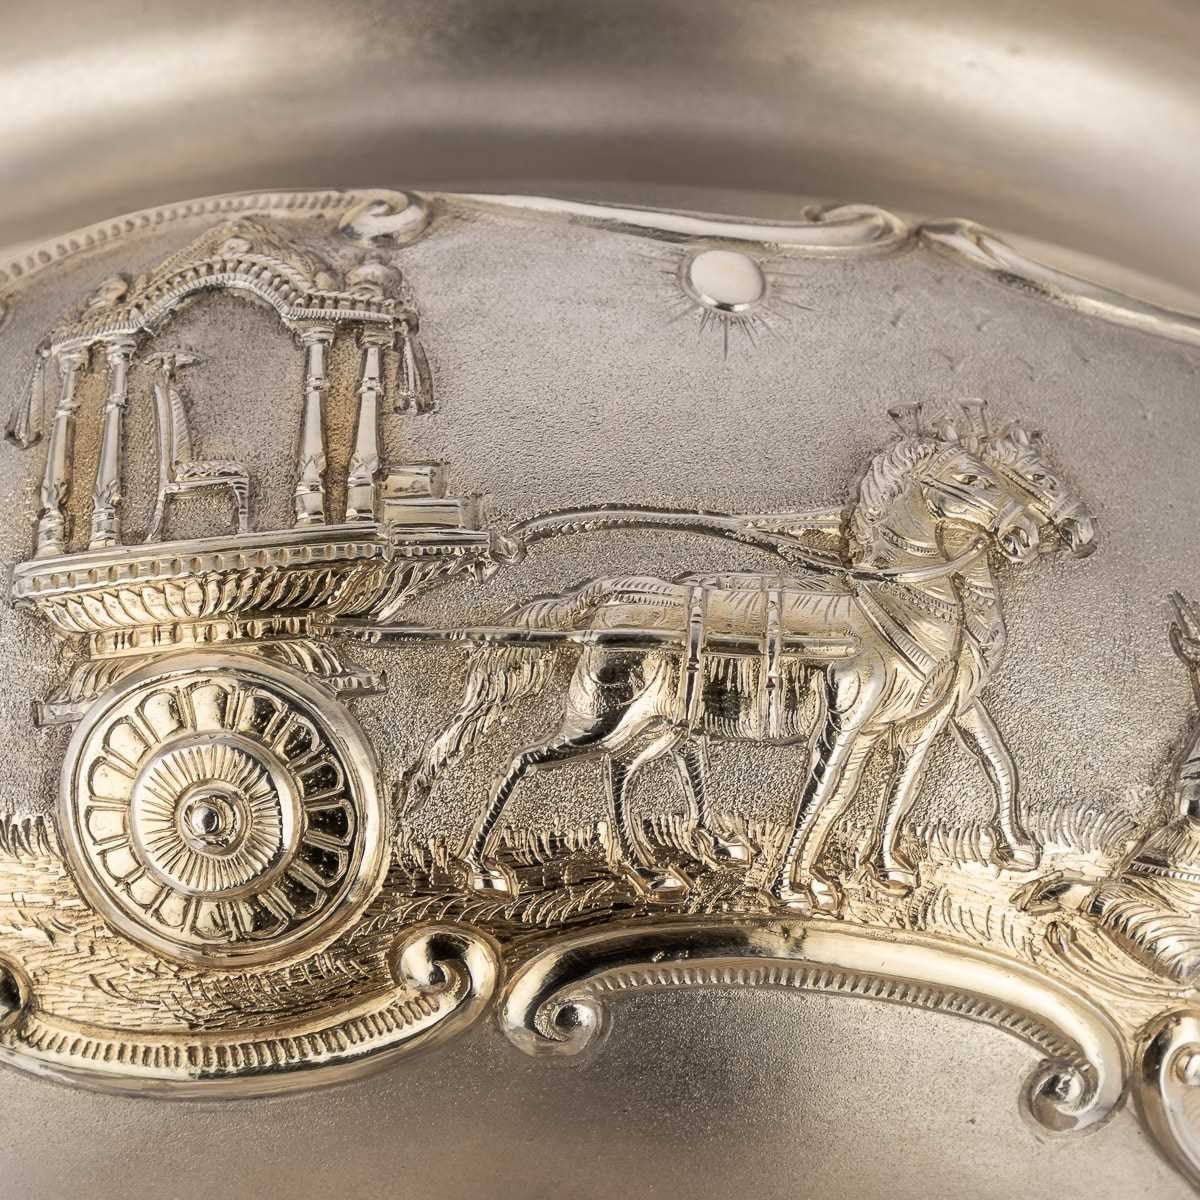 AN EARLY 20TH CENTURY INDIAN SOLID SILVER BOWL, CALCUTTA c.1910 - Image 22 of 22